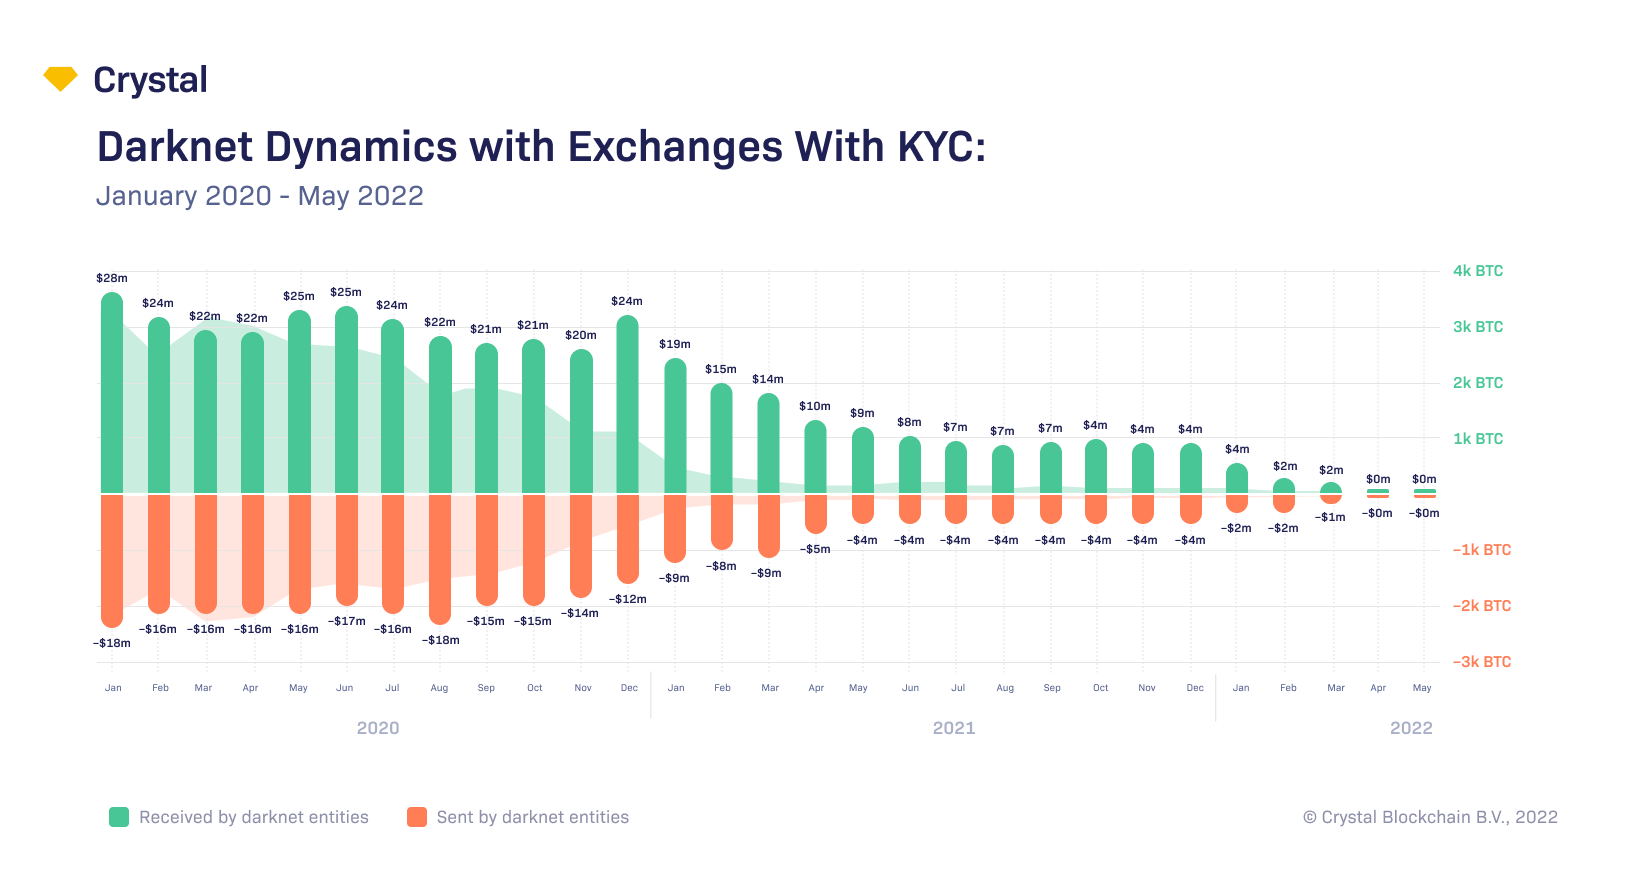 Darknet Dynamics with Exchanges With KYC: January 2020 - May 2022